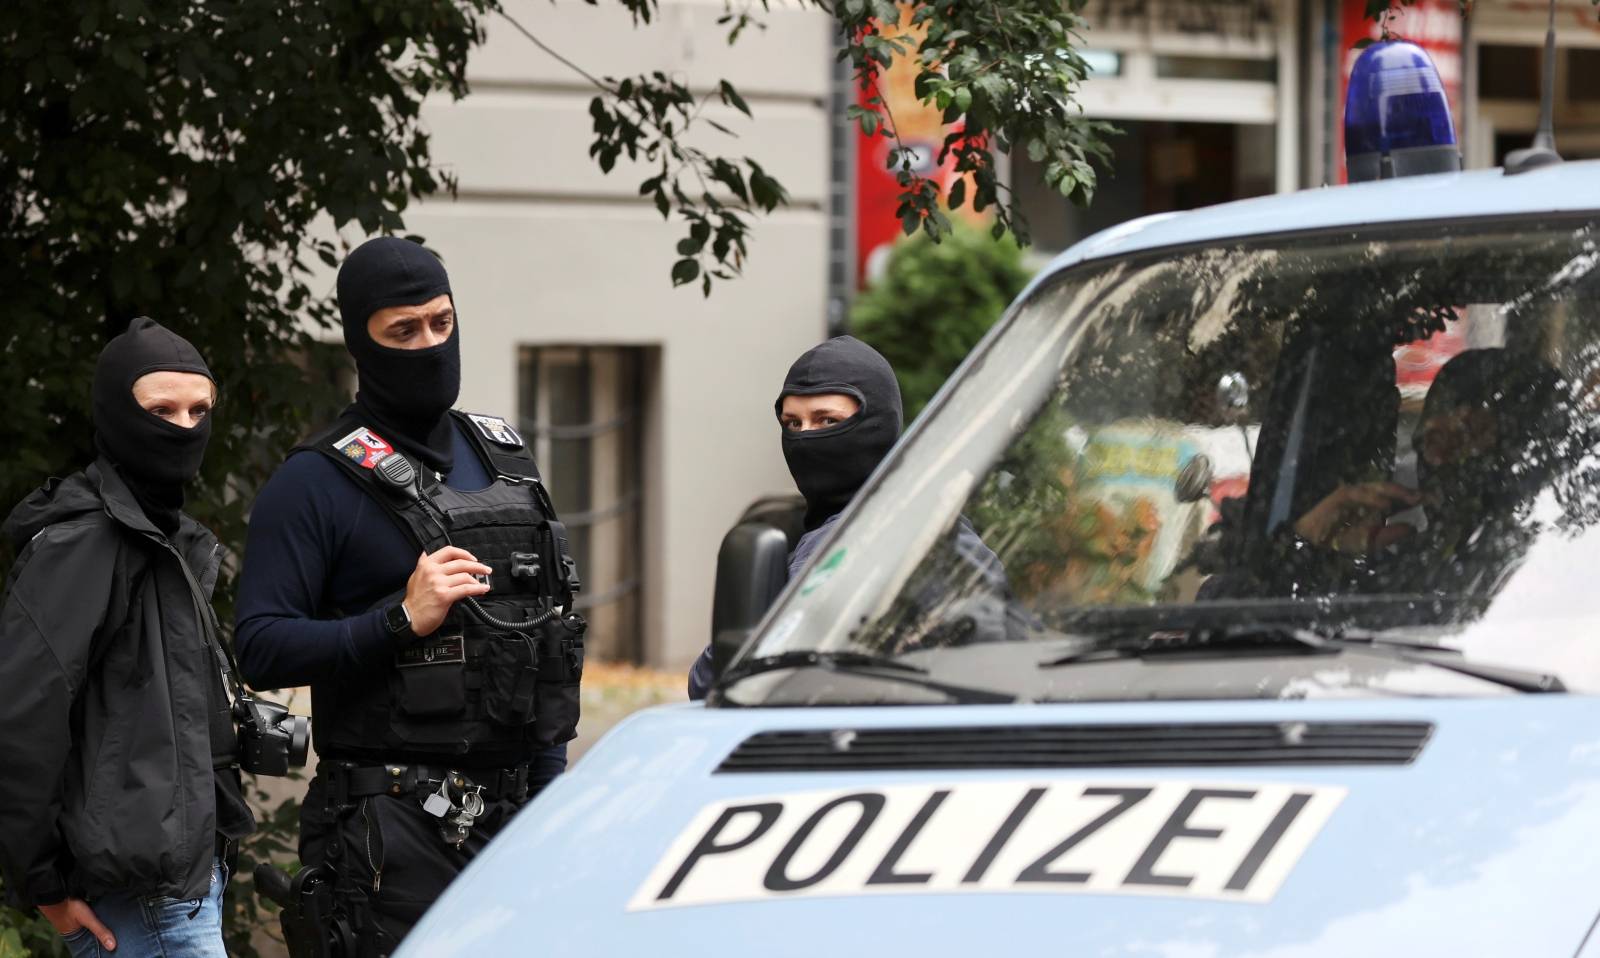 Police officers gather outside during a raid in an apartment building at Kreuzberg district in Berlin